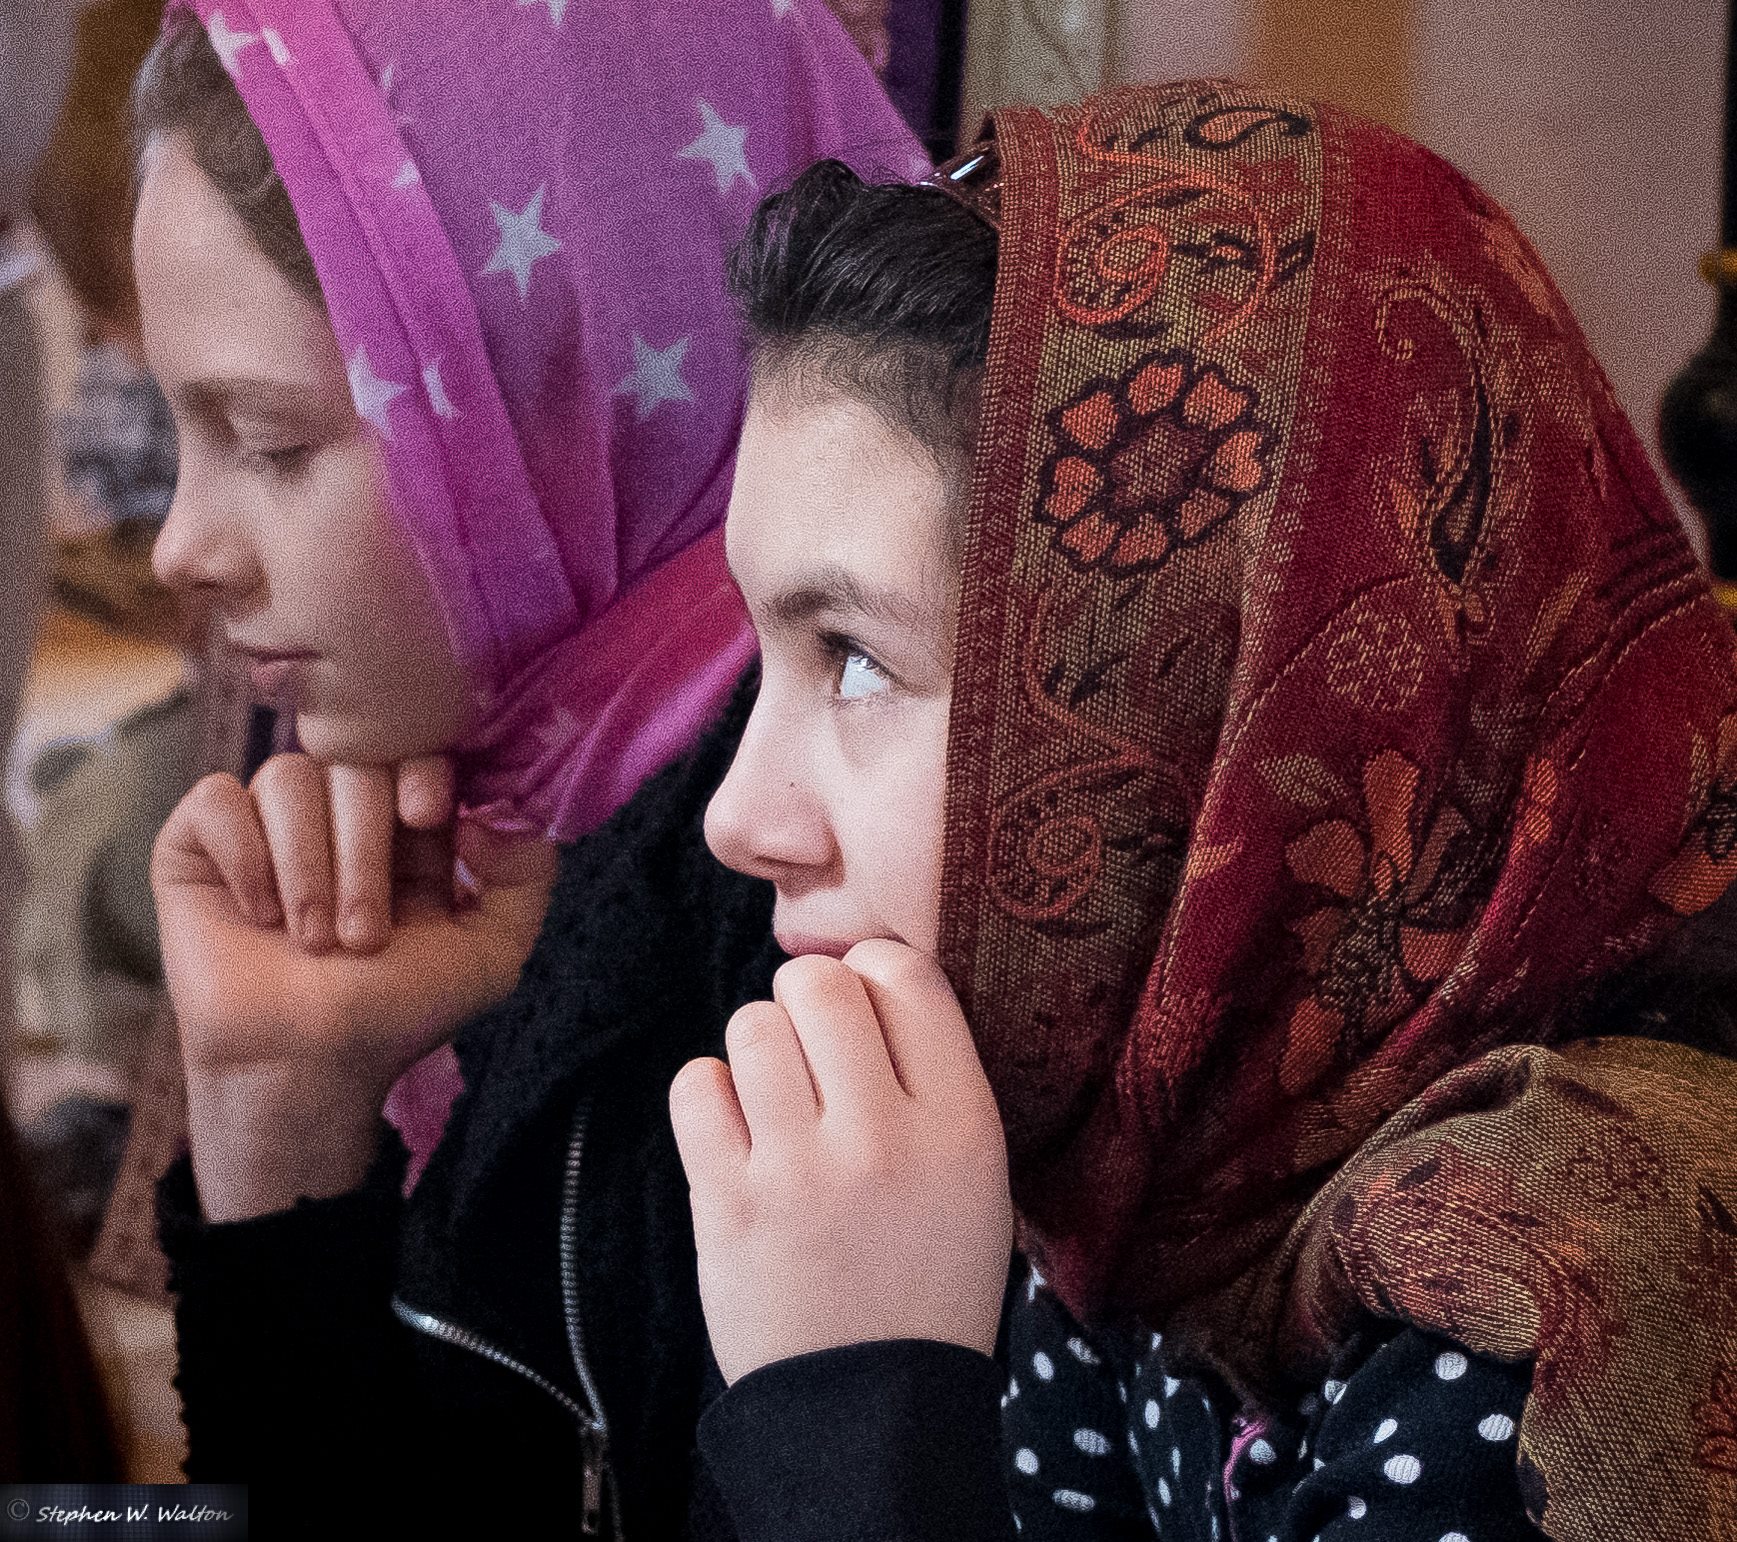  profile of two young girls with headscarves and hands on chin 